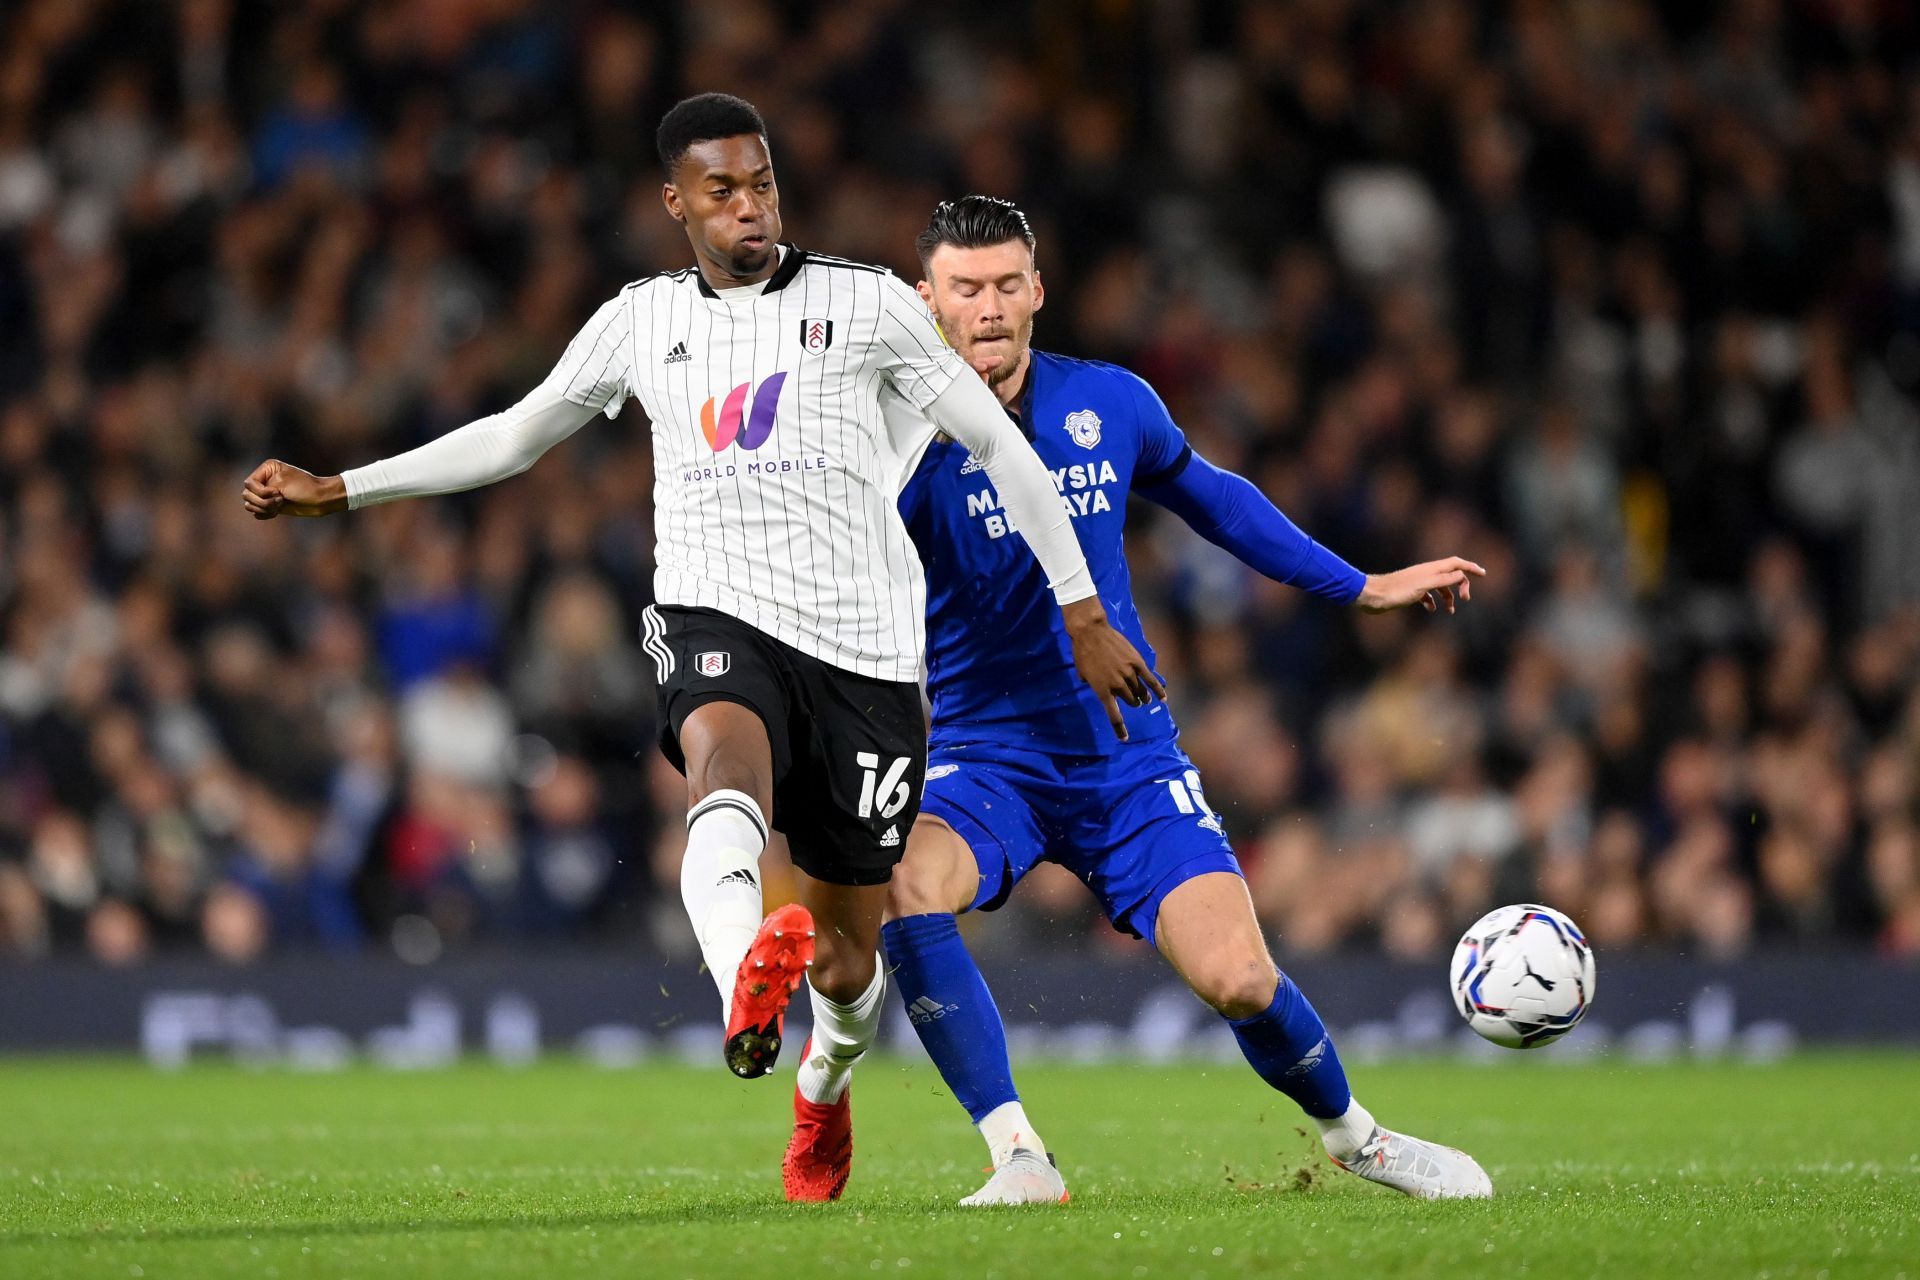 Cardiff City and Fulham go head-to-head on Saturday